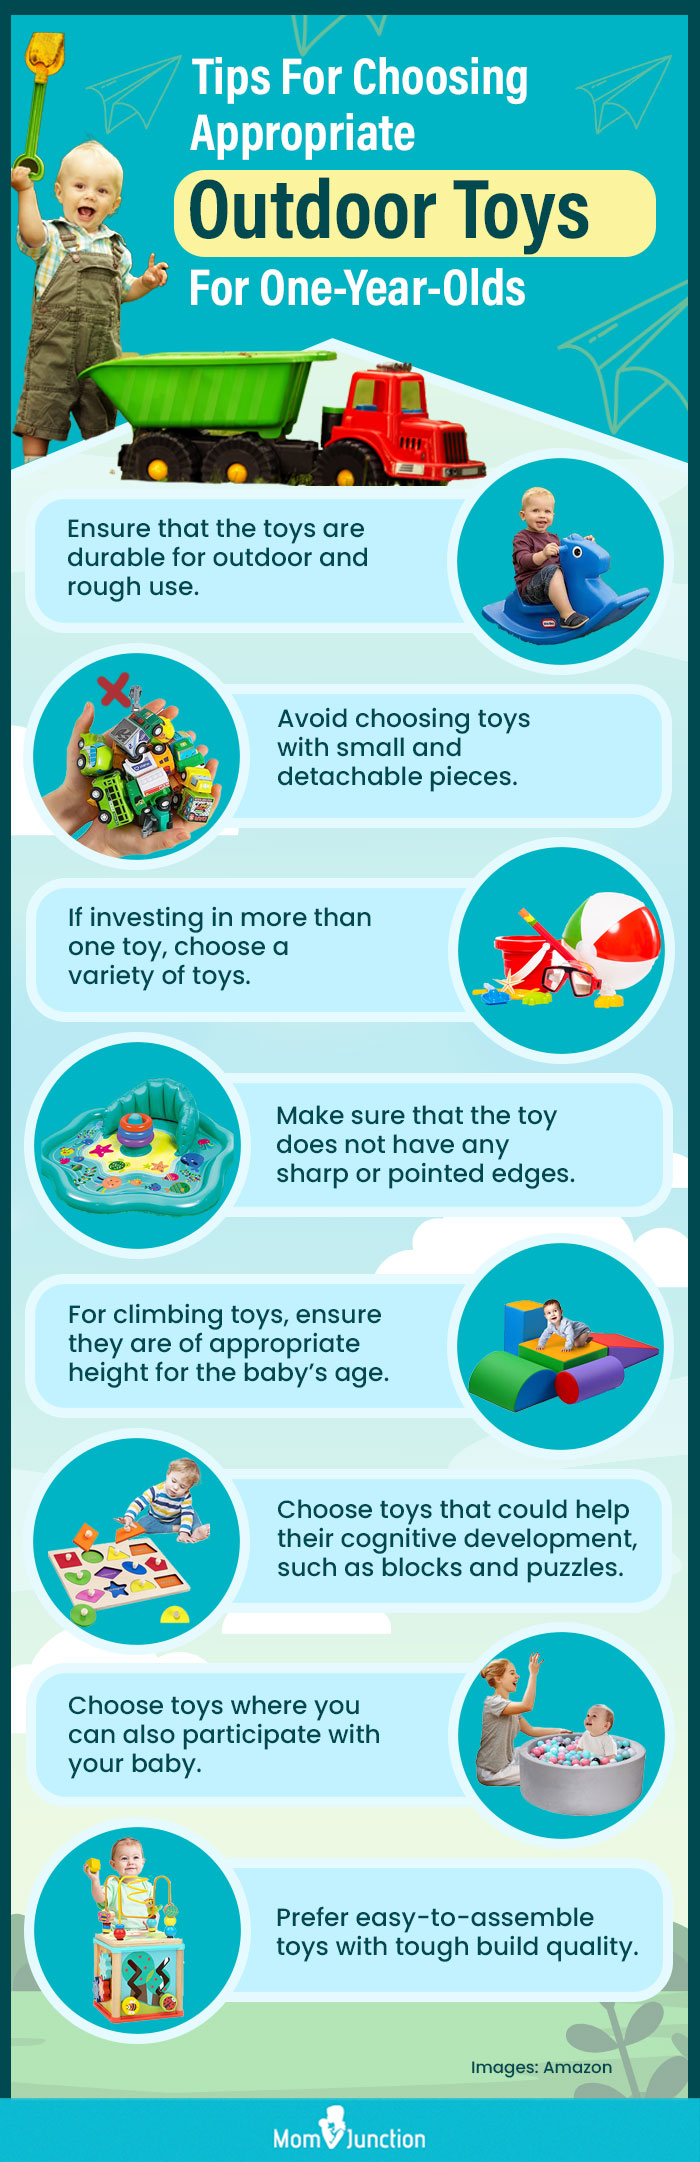 Tips For Choosing Appropriate Outdoor Toys For One Year Olds (infographic)